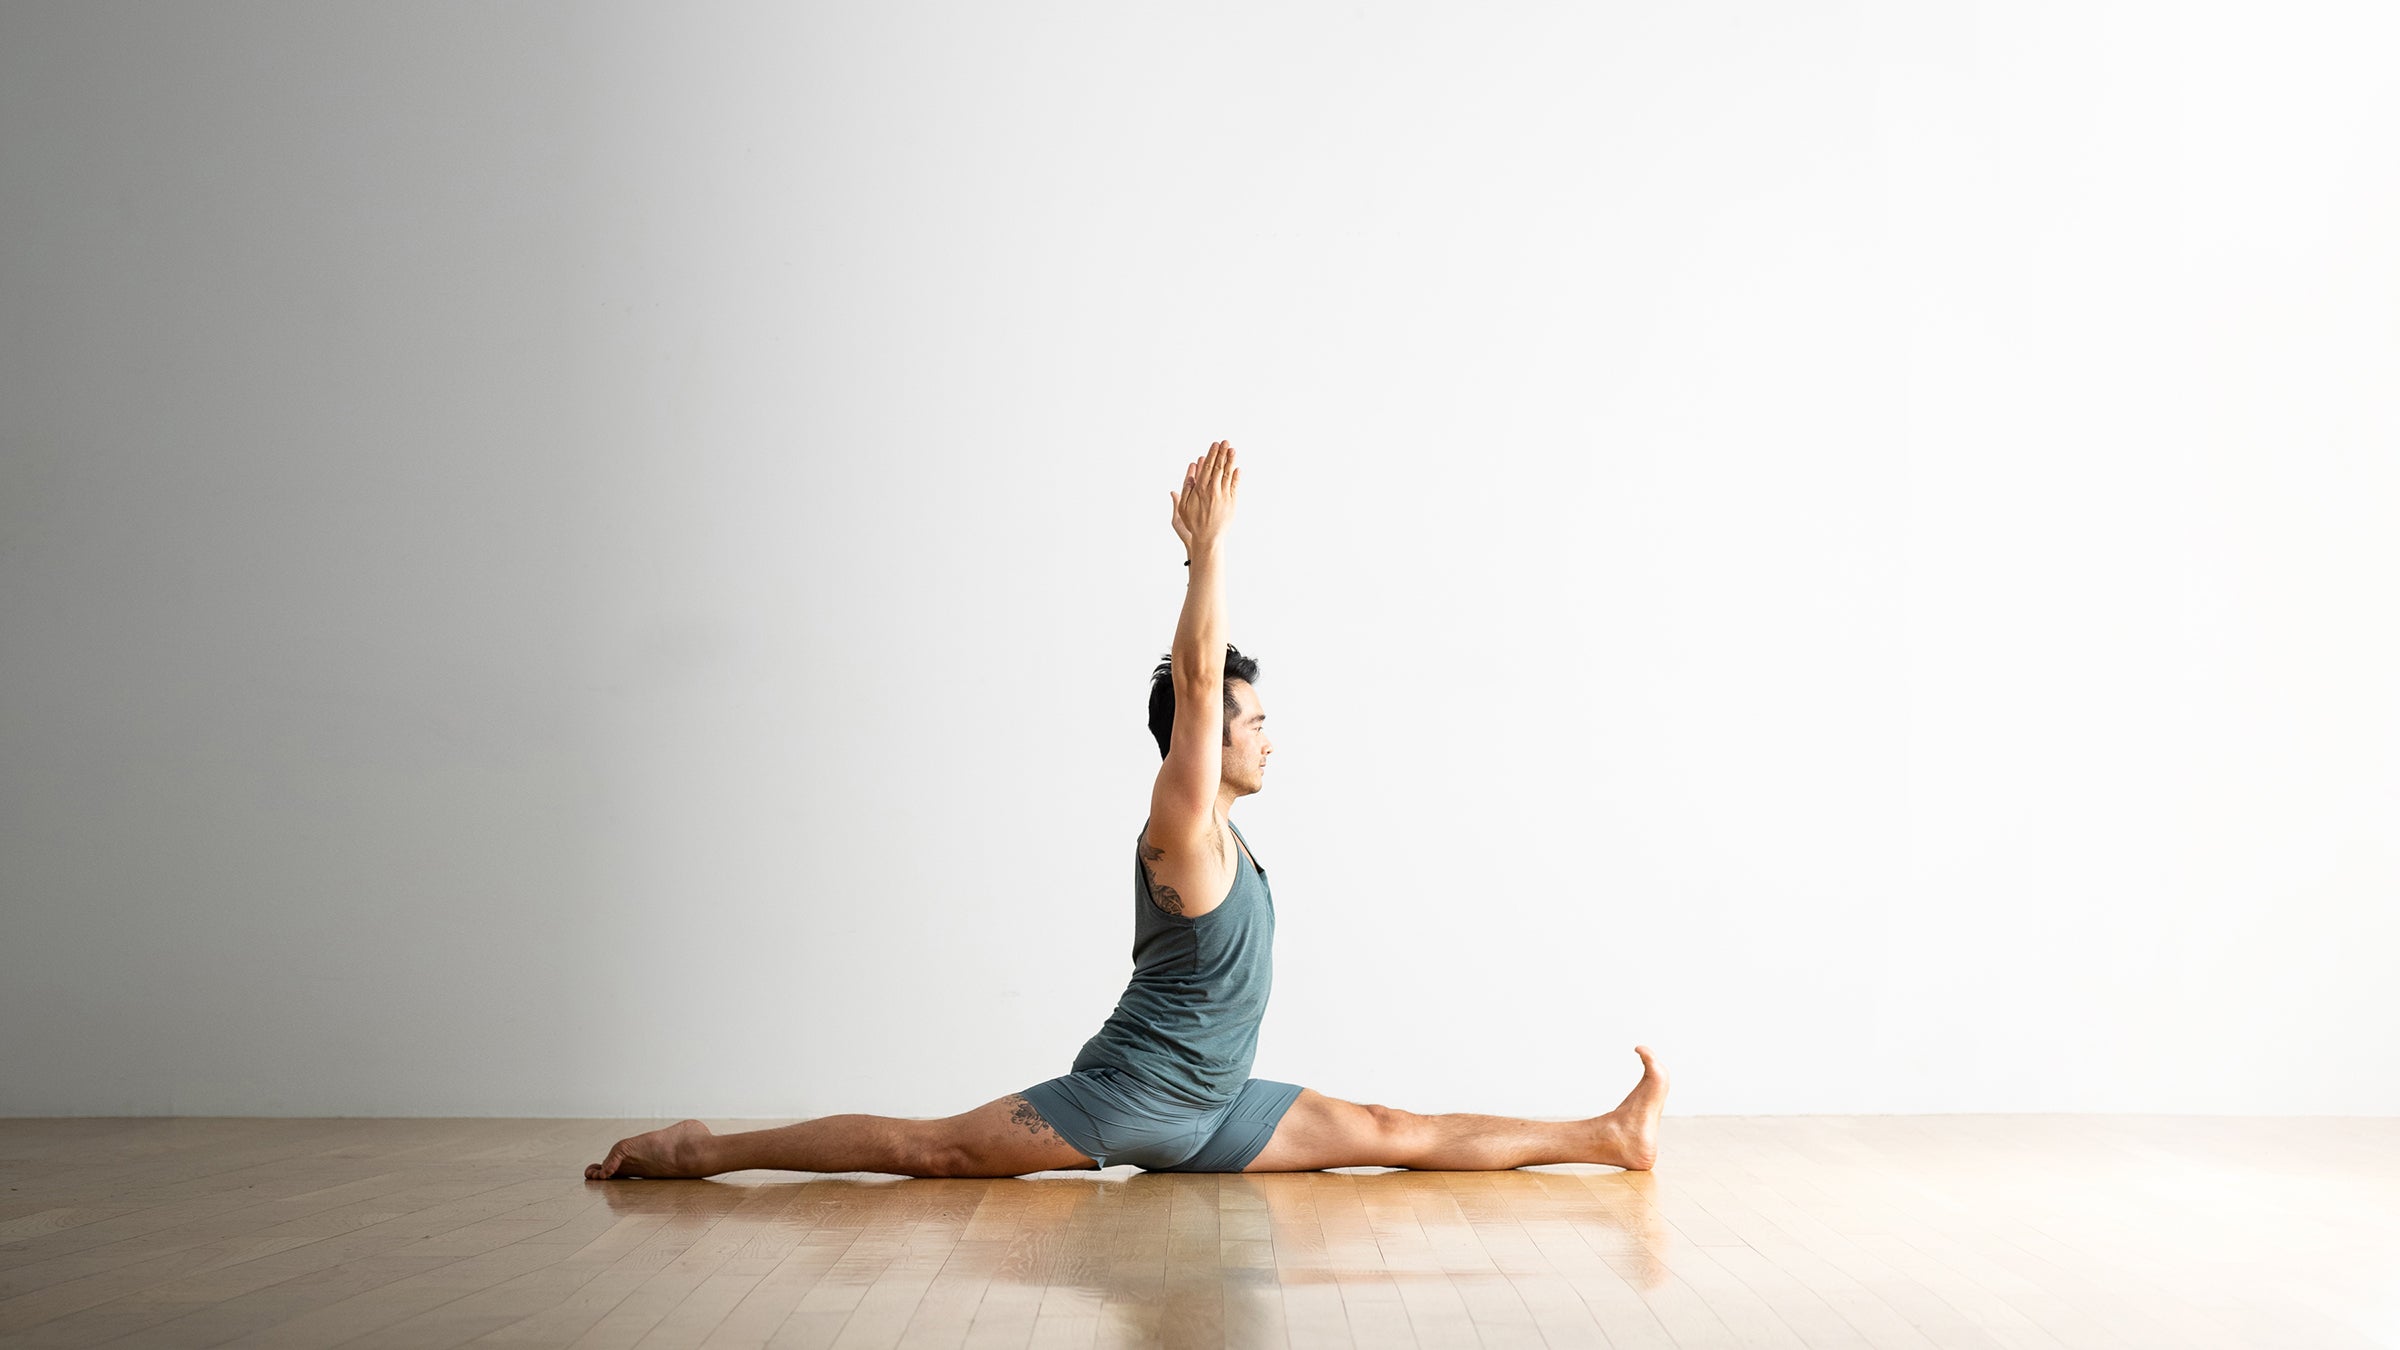 What are some extreme yoga poses? - Quora